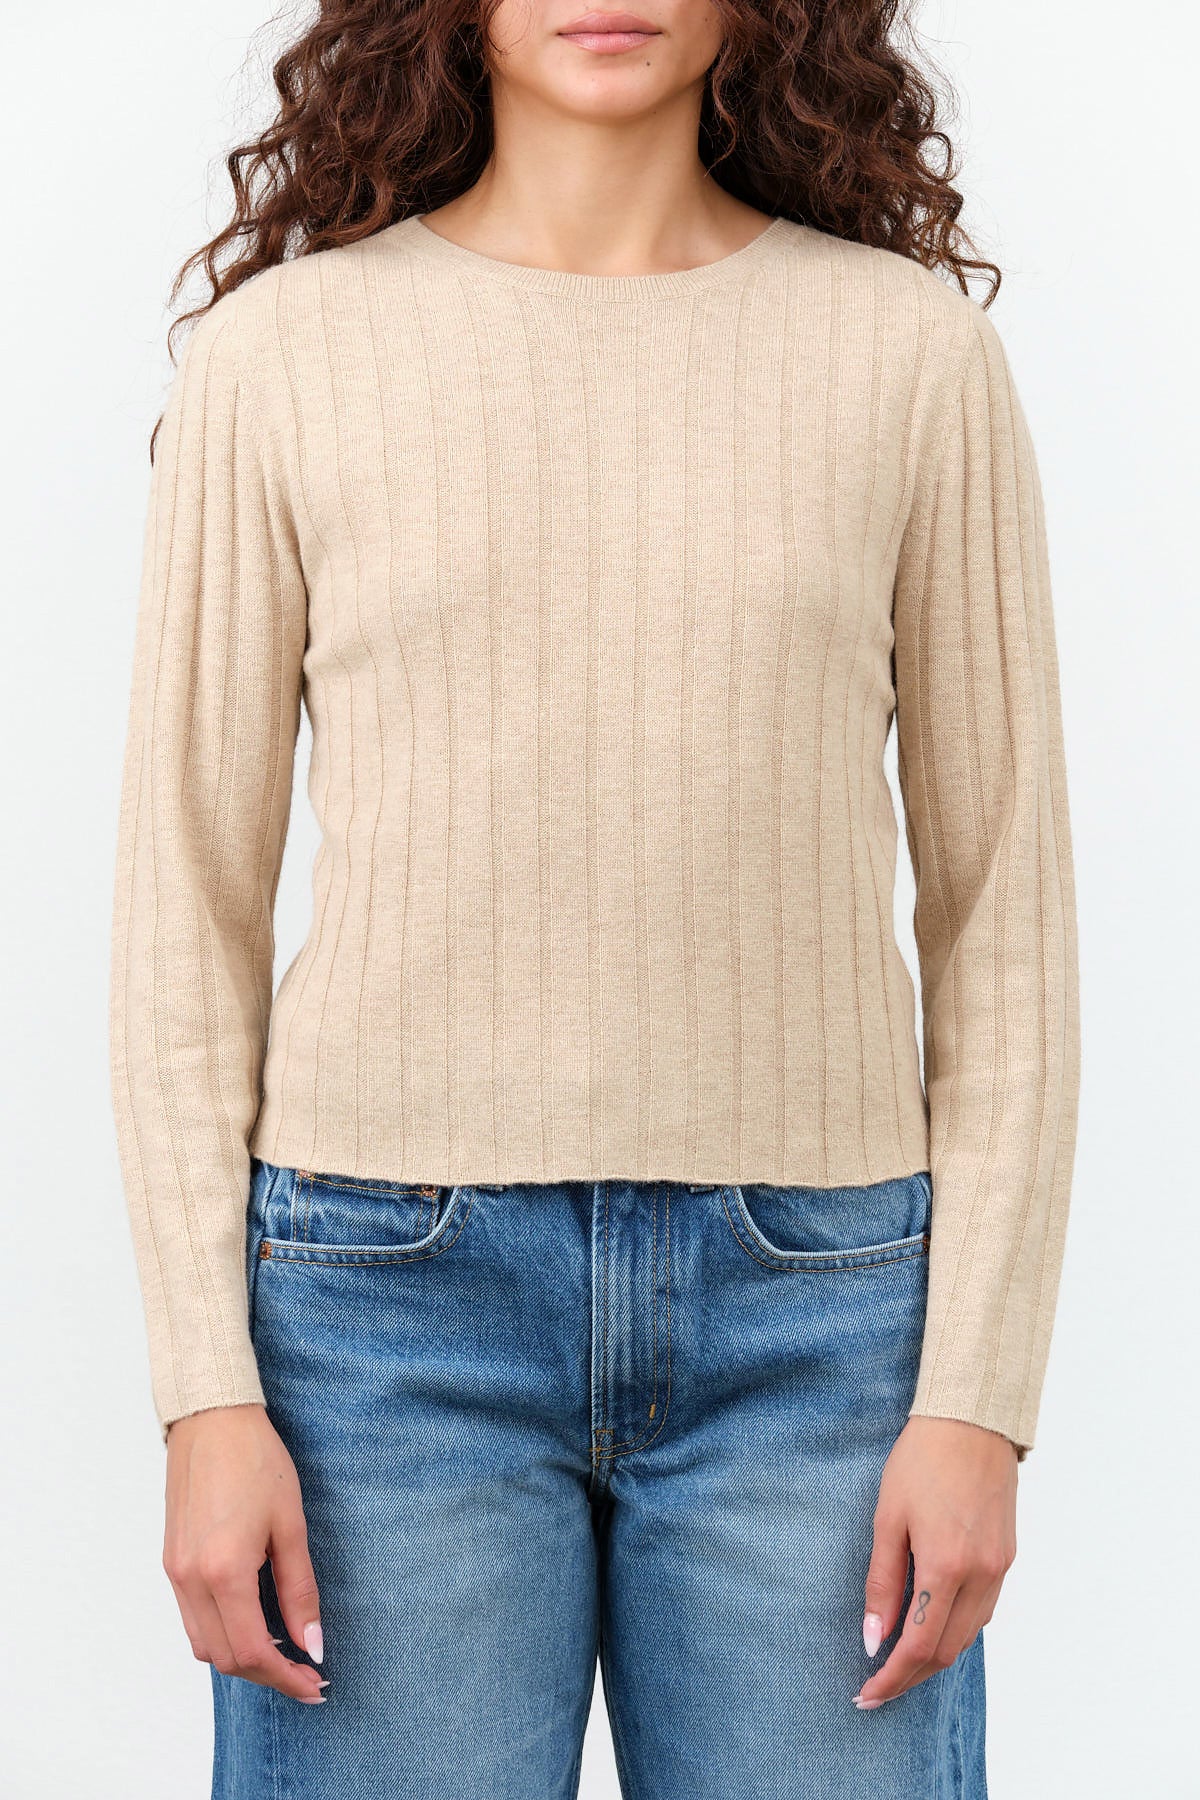 Yak Ribbed Long Sleeve Top by 7115 by Szeki in Desert Sand